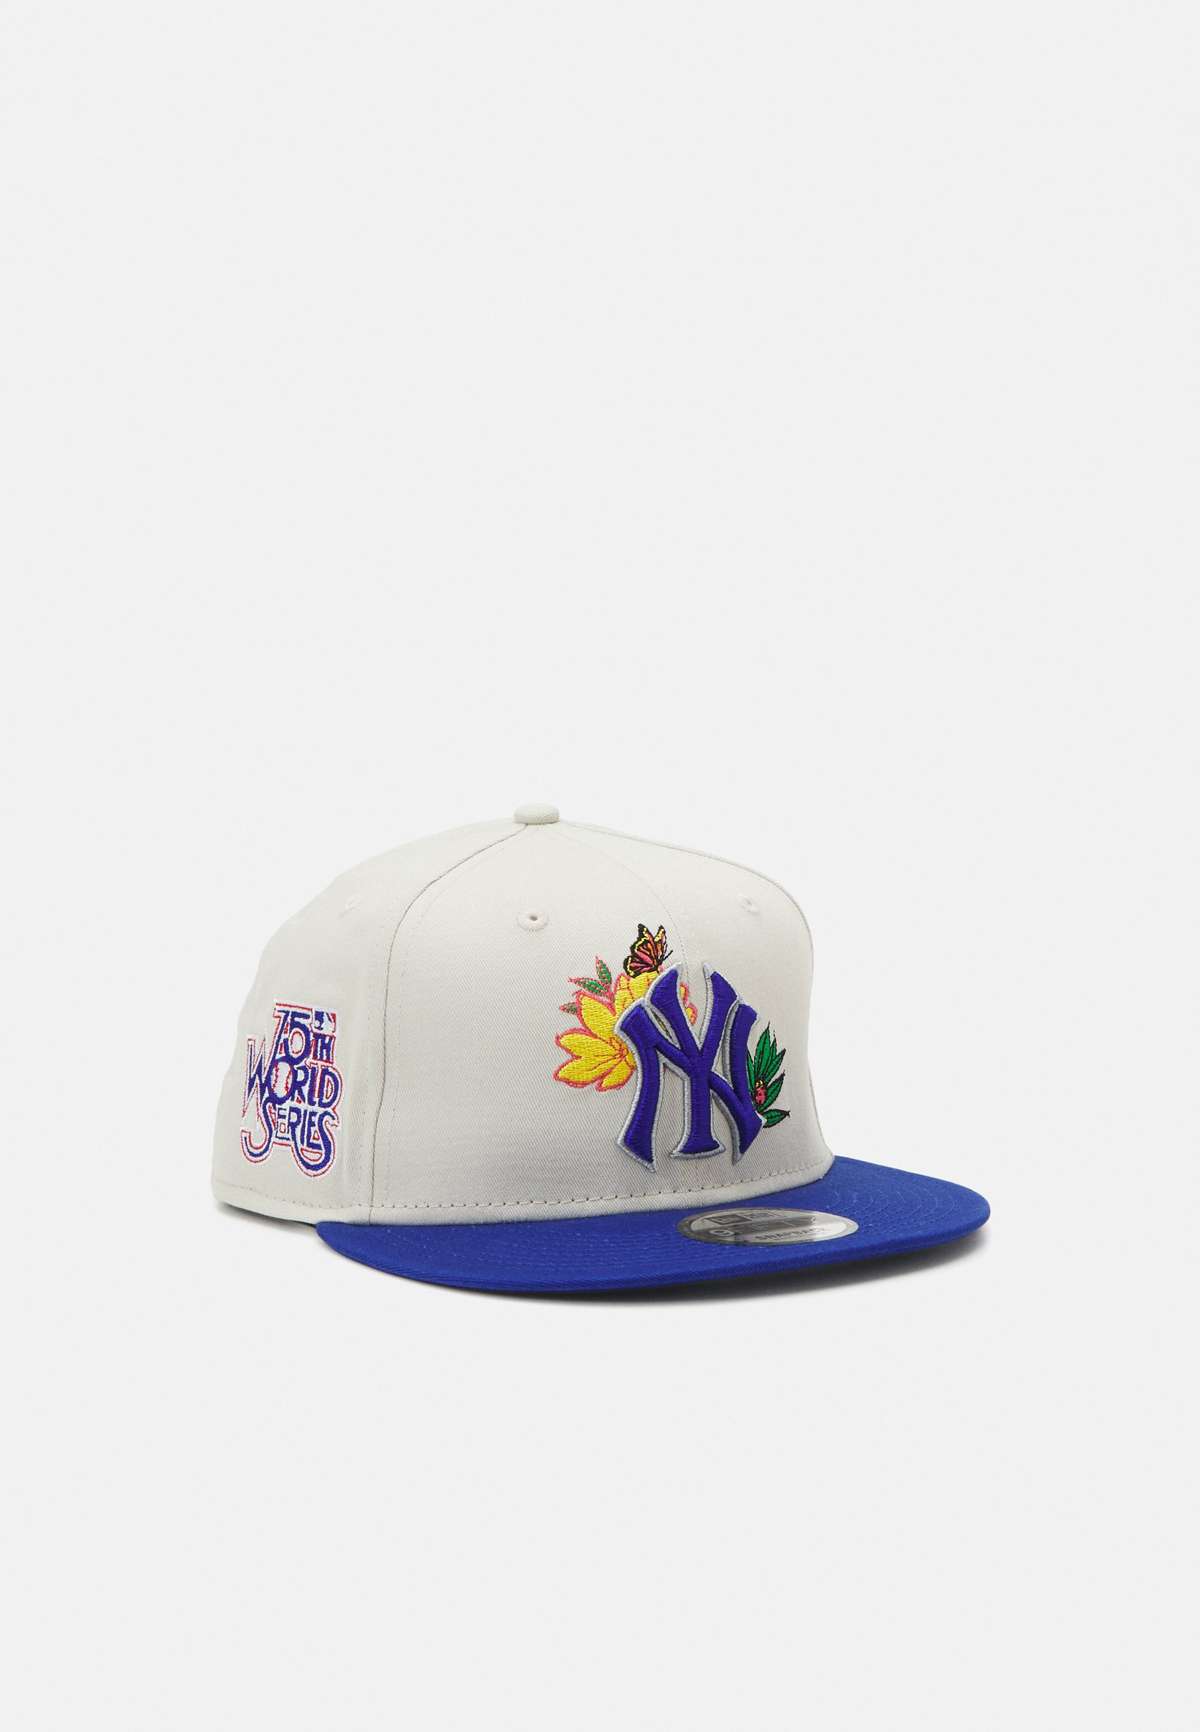 Кепка MLB FLORAL 9FIFTY® UNISEX